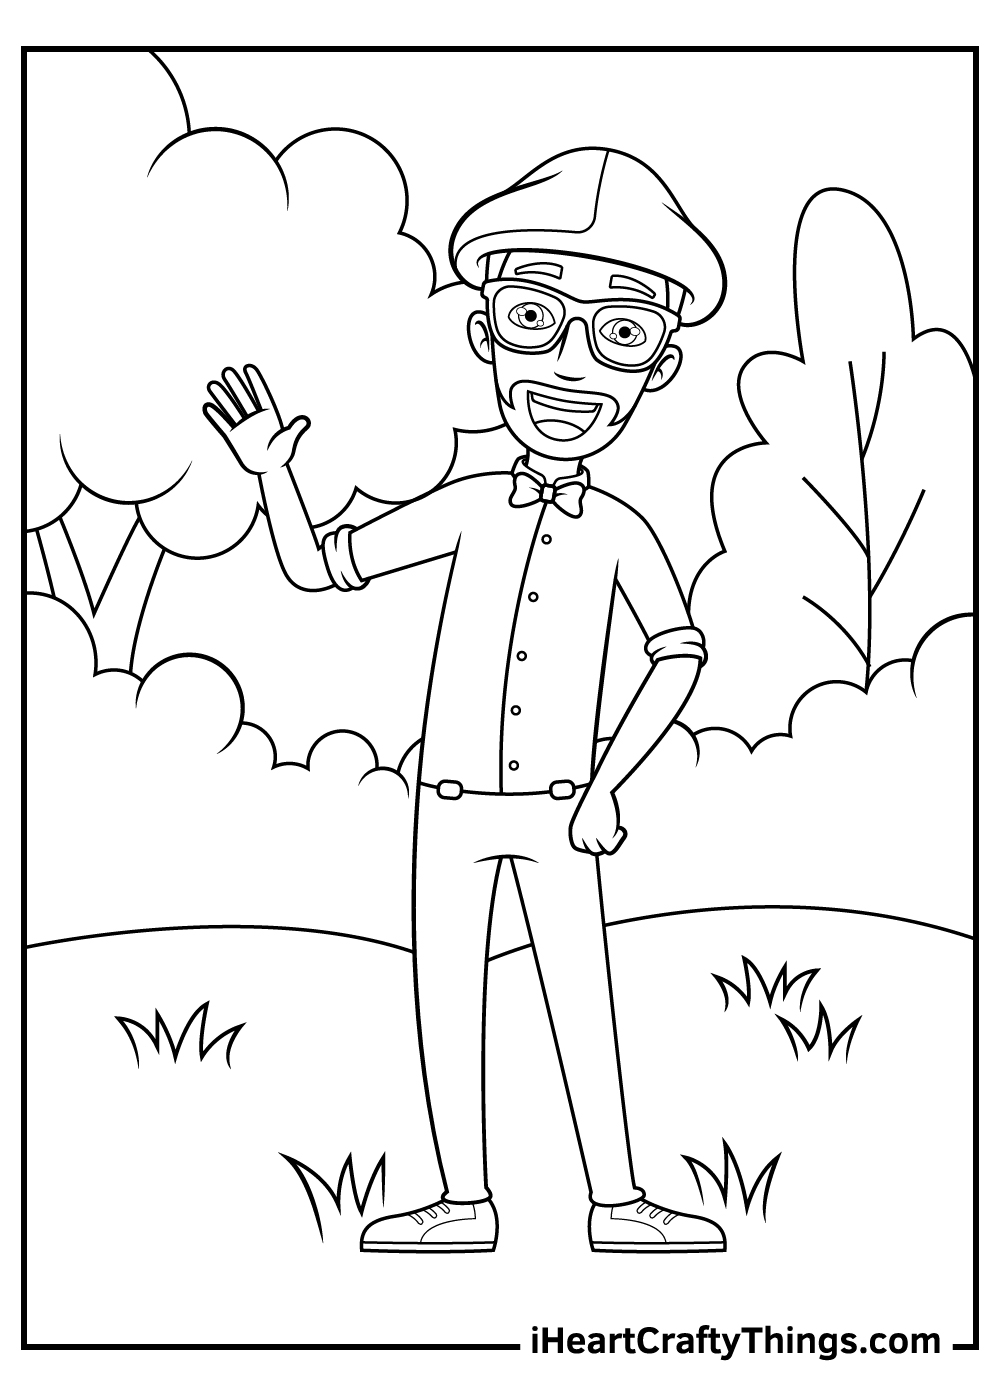 Blippi character coloring pages free printables